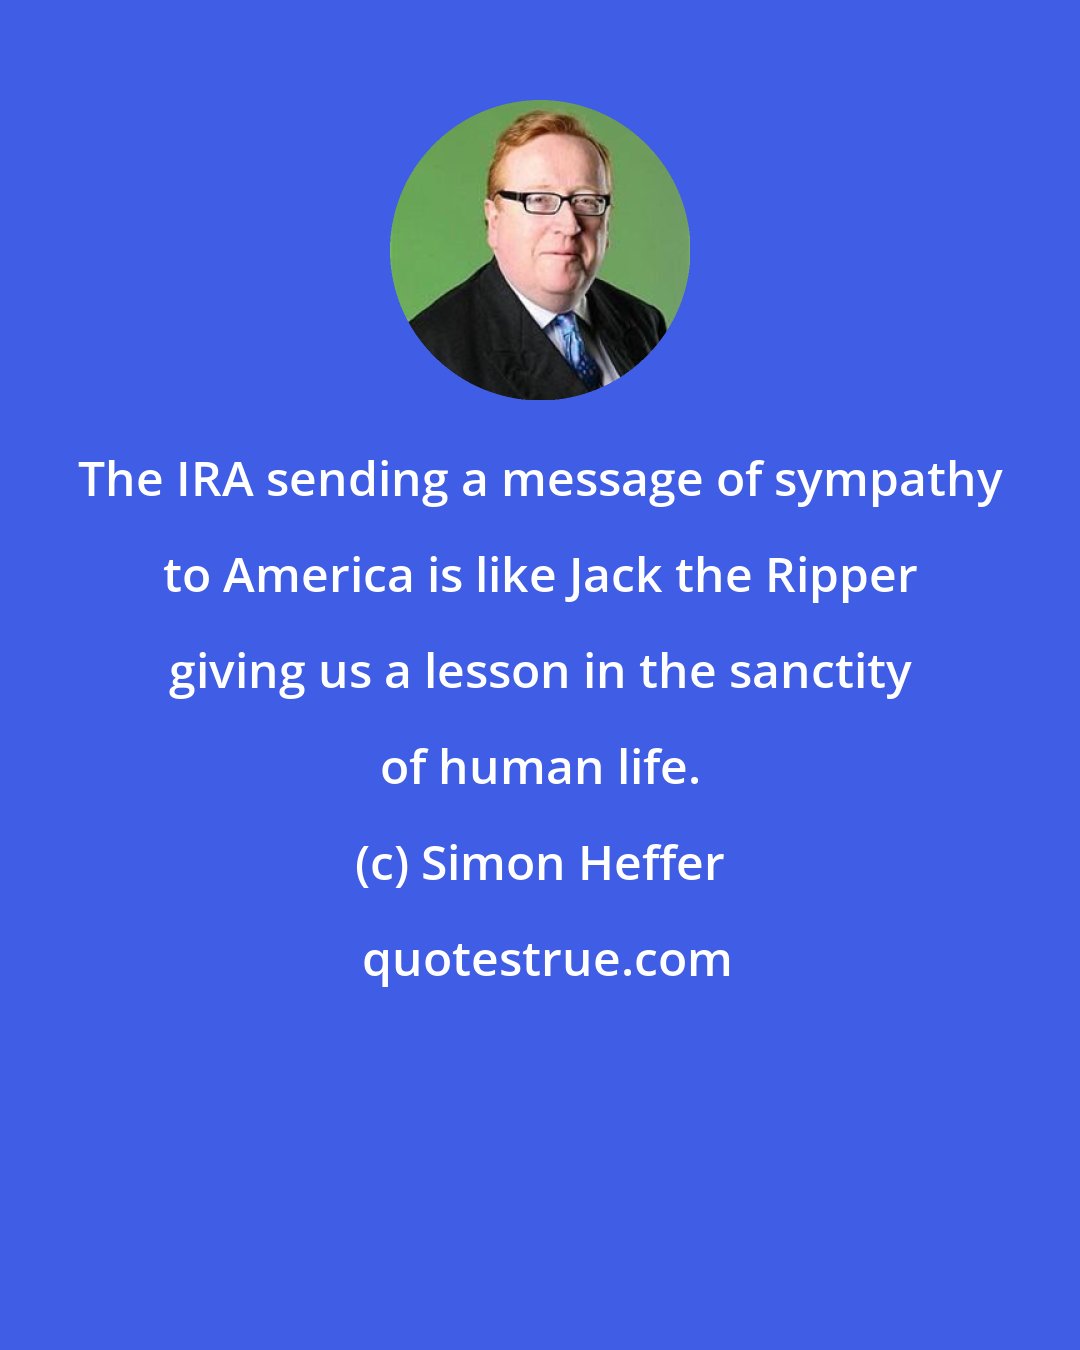 Simon Heffer: The IRA sending a message of sympathy to America is like Jack the Ripper giving us a lesson in the sanctity of human life.